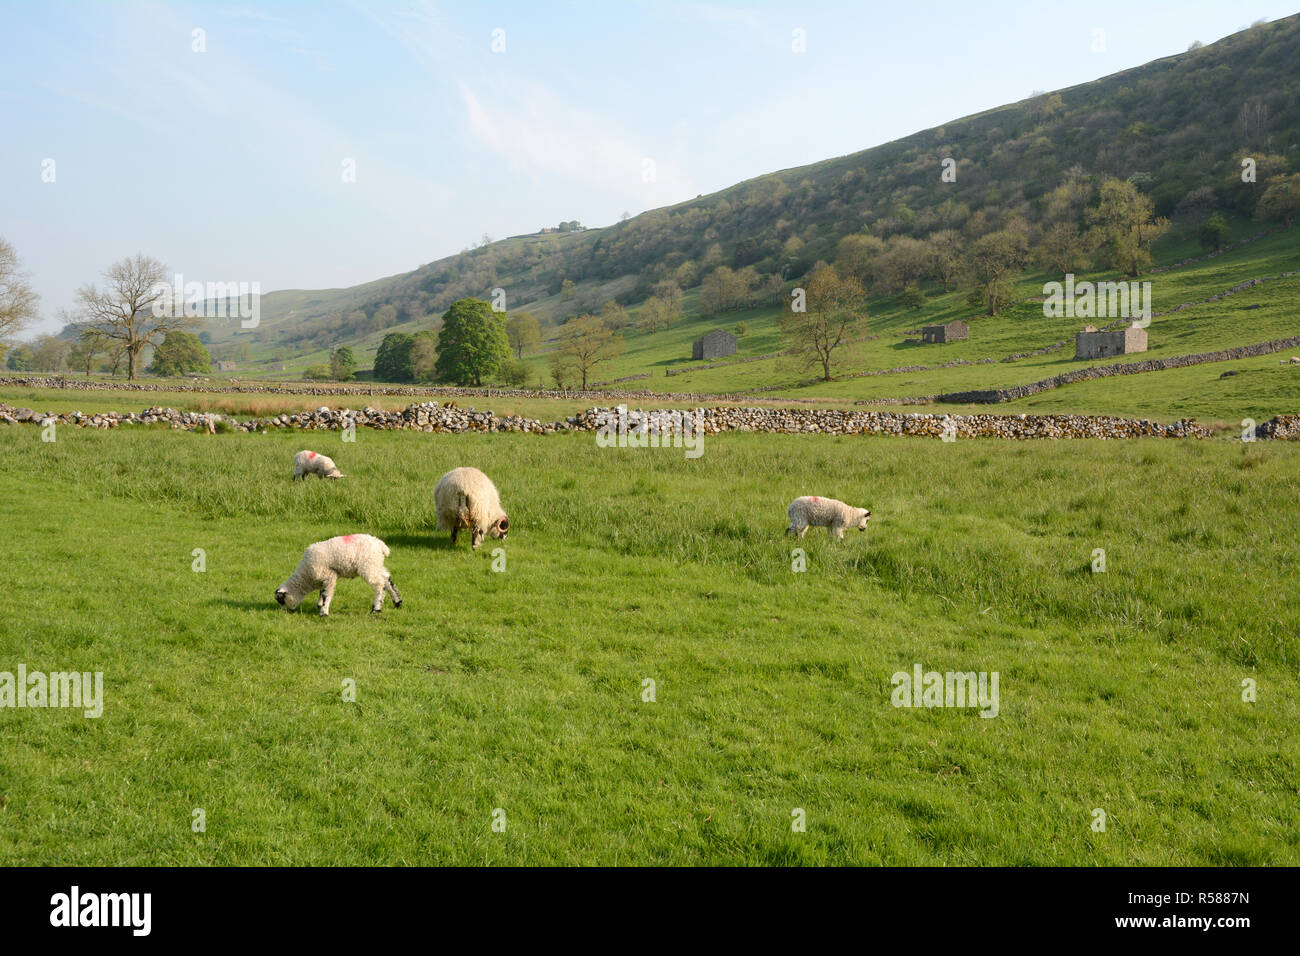 Sheep grazing in a meadow along the Dales Way hiking trail, near Grassington, Yorkshire, Northern England, Great Britain. Stock Photo